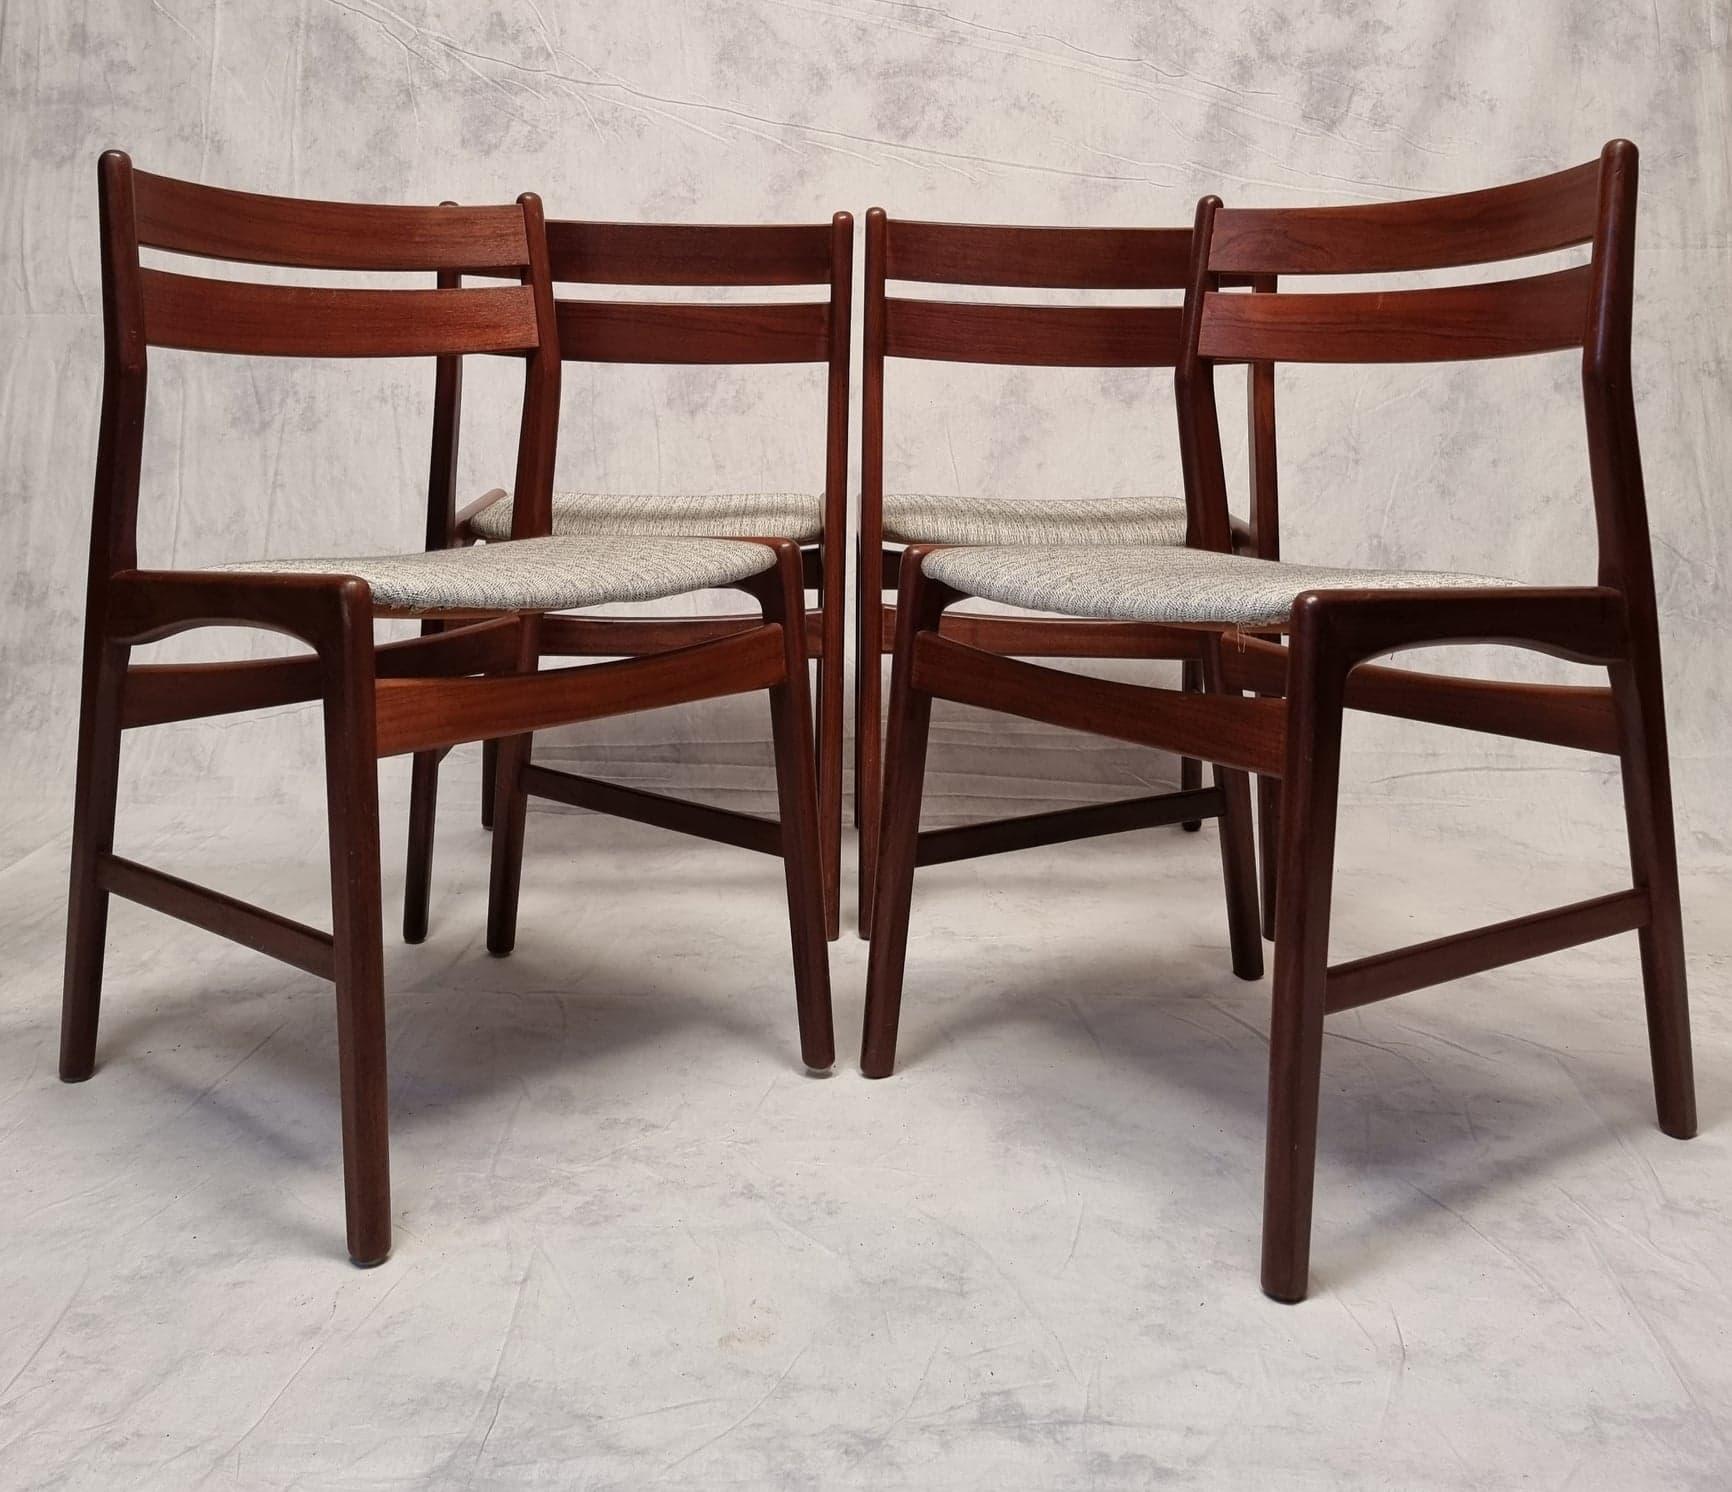 Mid-20th Century Set of Four Scandinavian Chairs - Teak, Ca 1960 For Sale